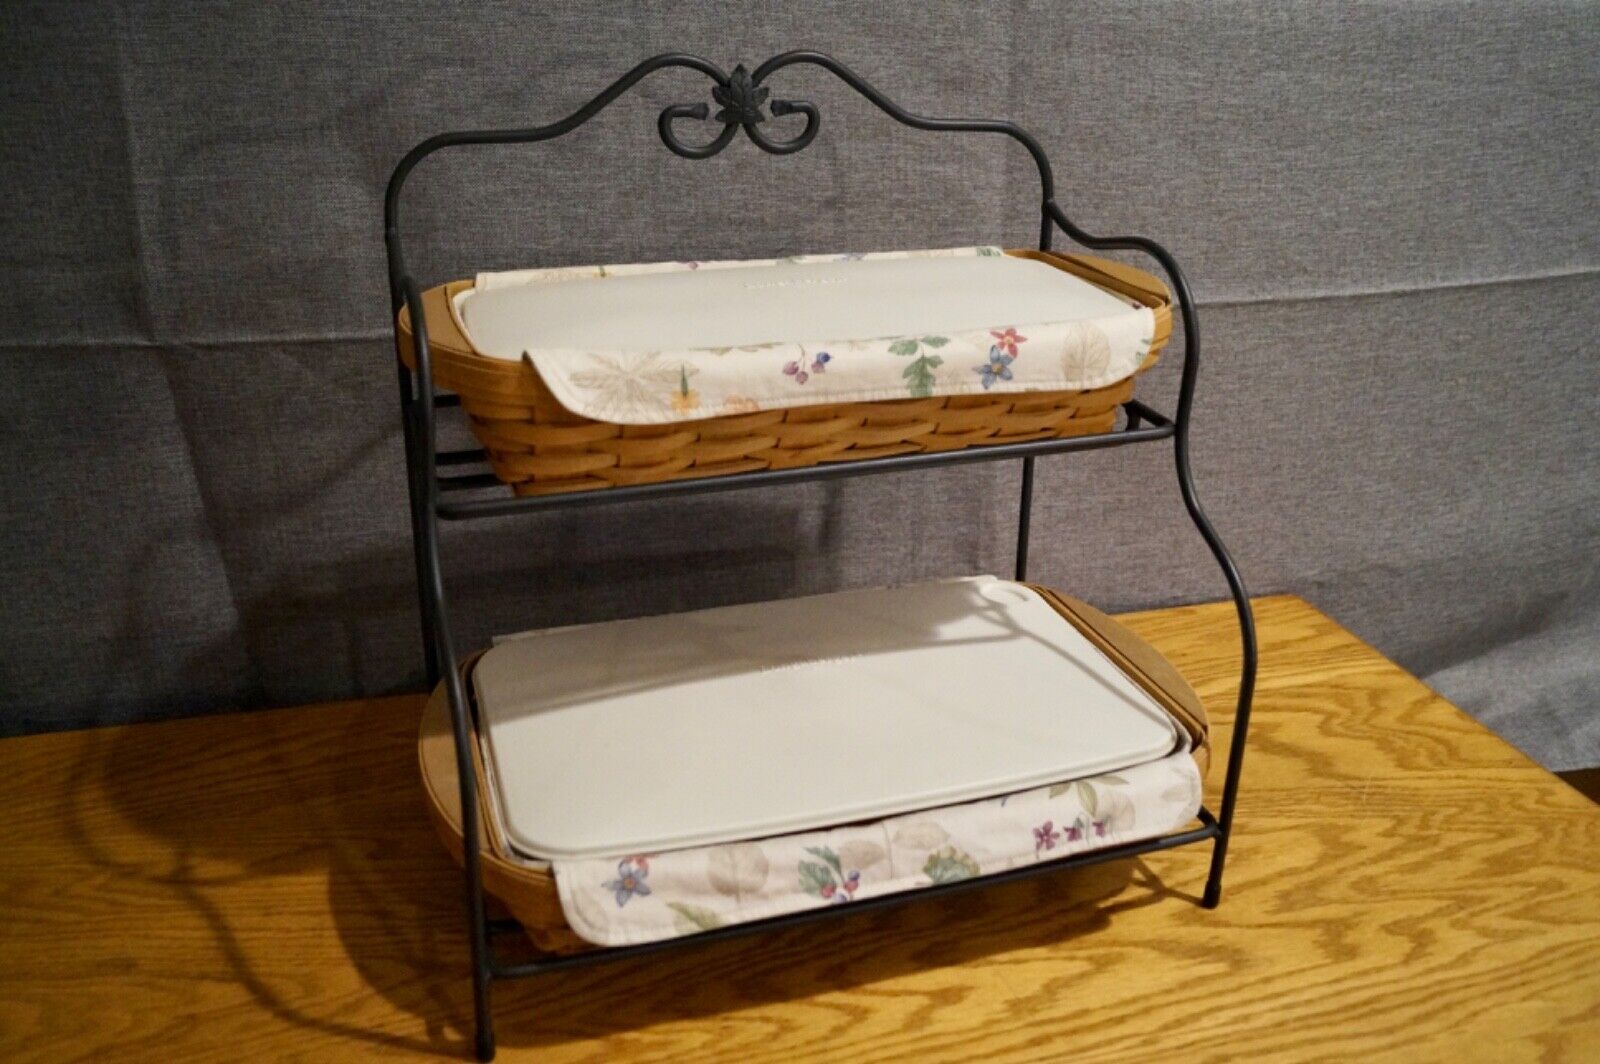 Longaberger Wrought Iron Bakers Rack w/ 2 Baskets, Liners, Protectors, & covers